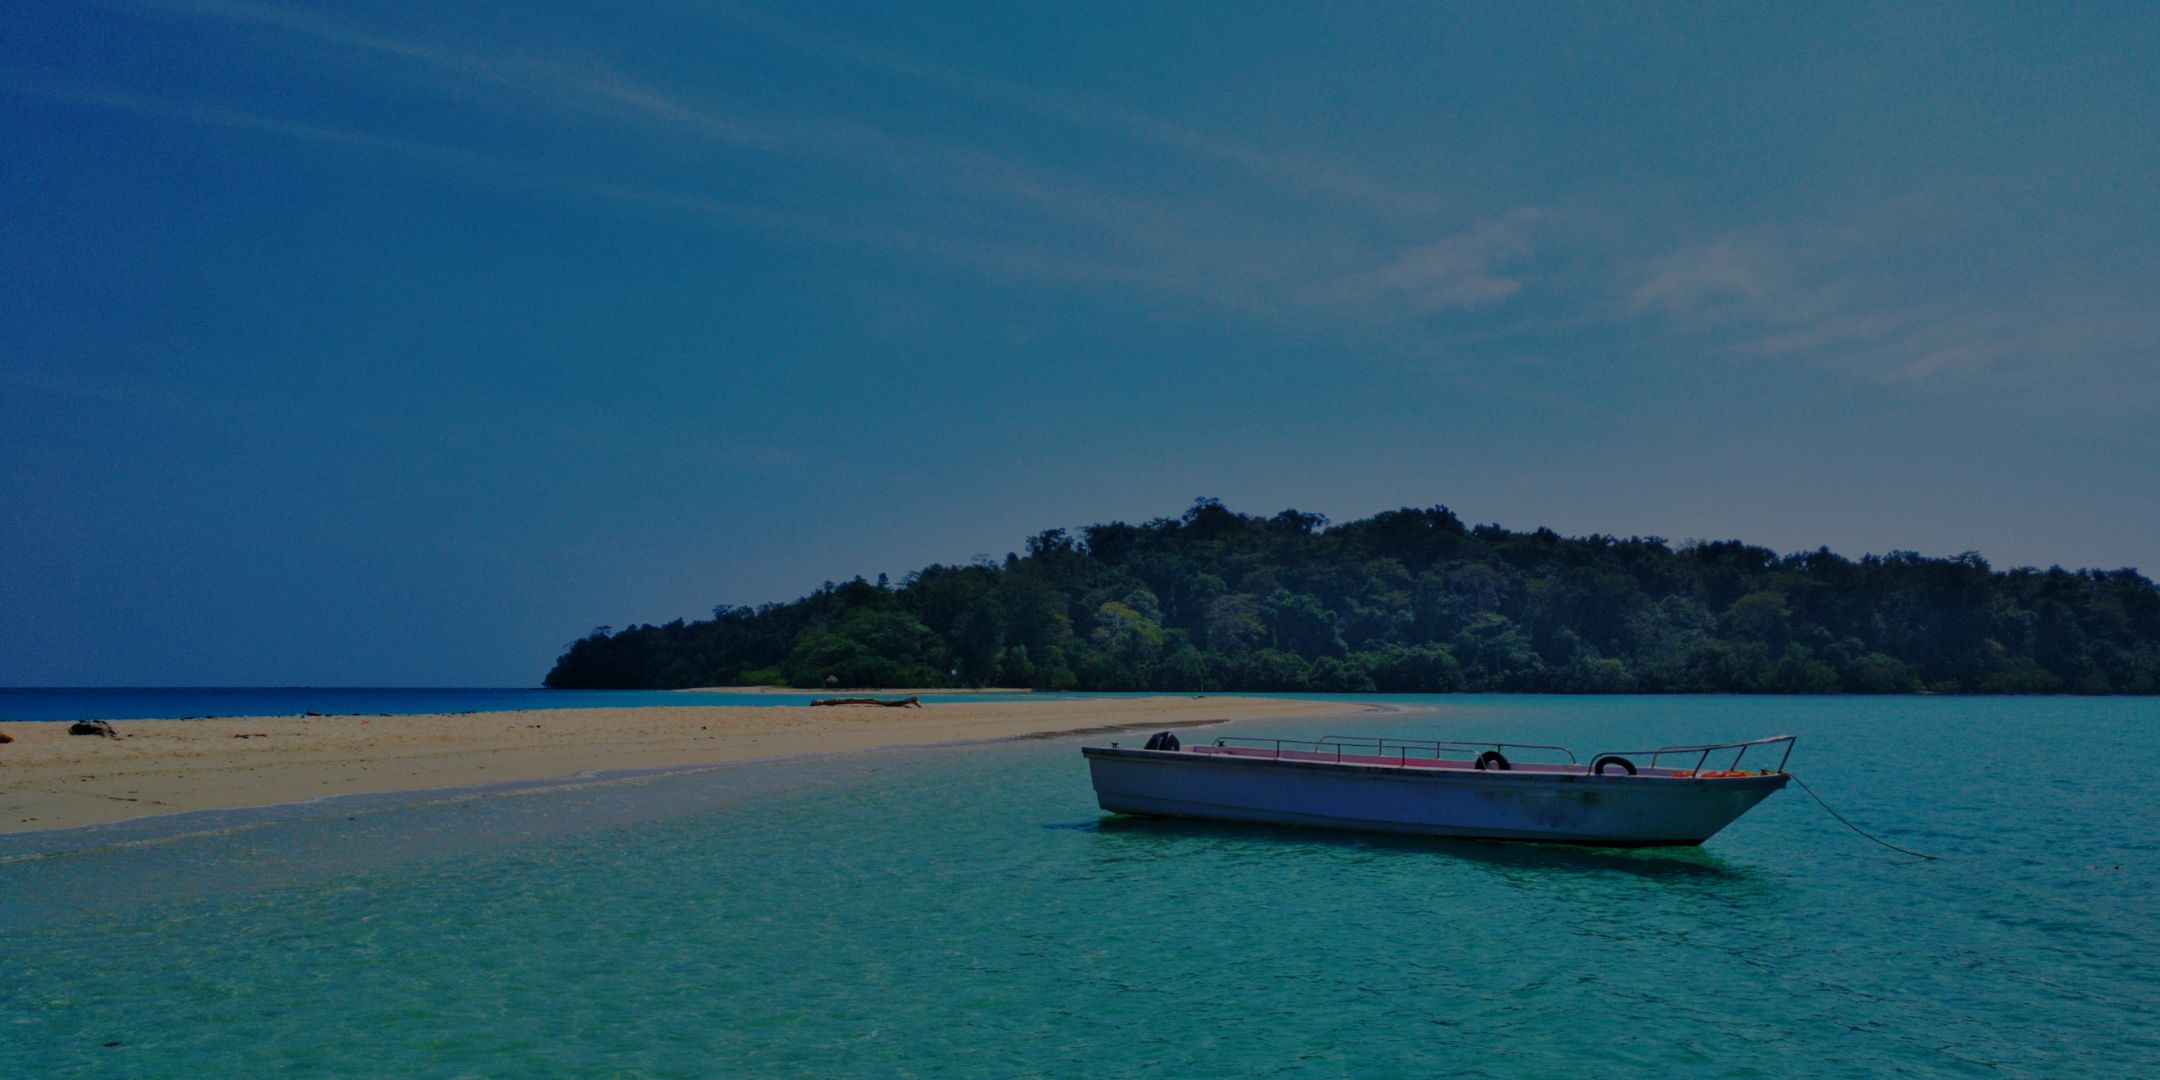 Cover Image - A week of Island hopping… In the Andamans